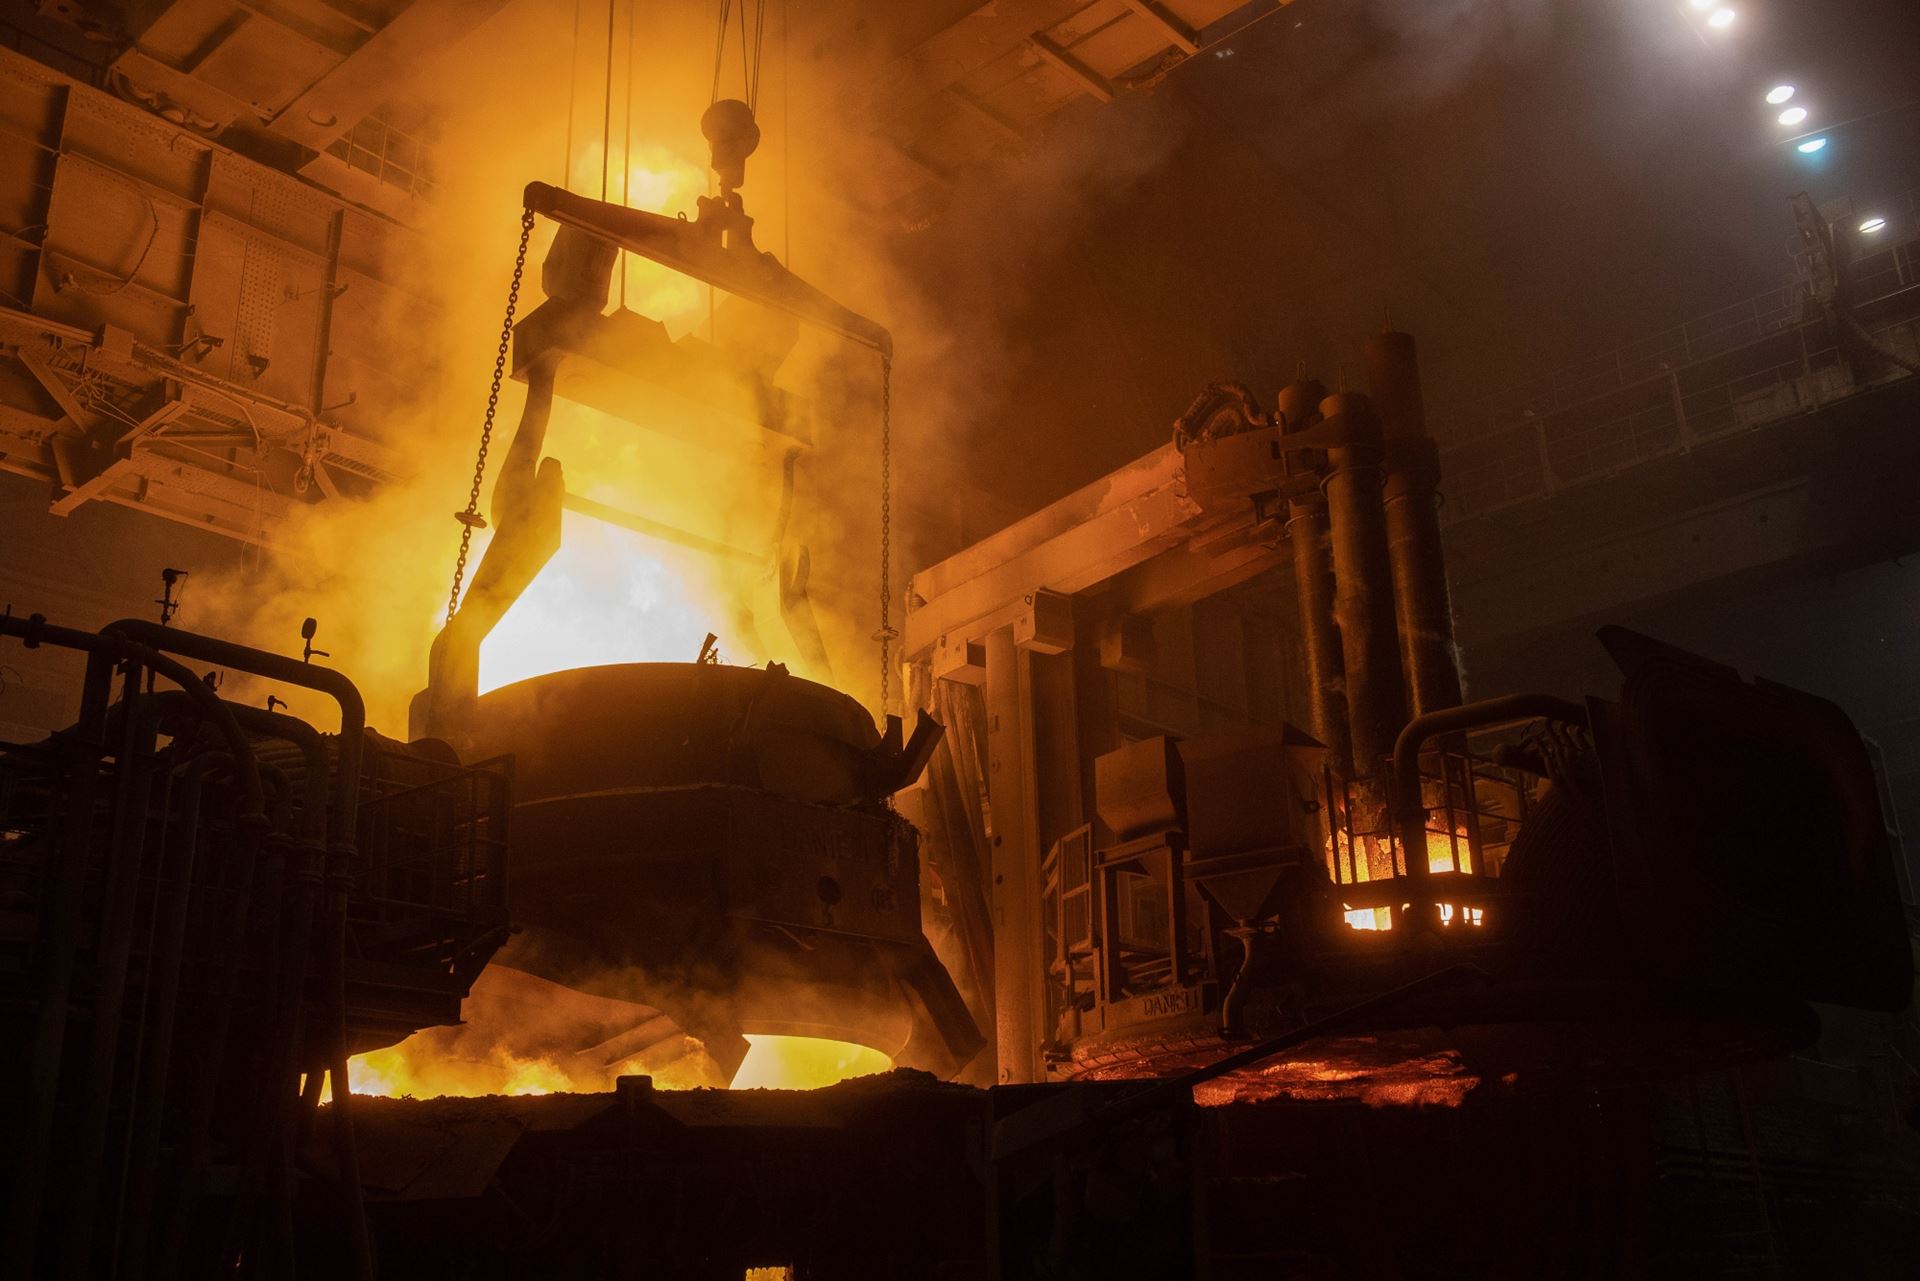 Russian steel production increased in April